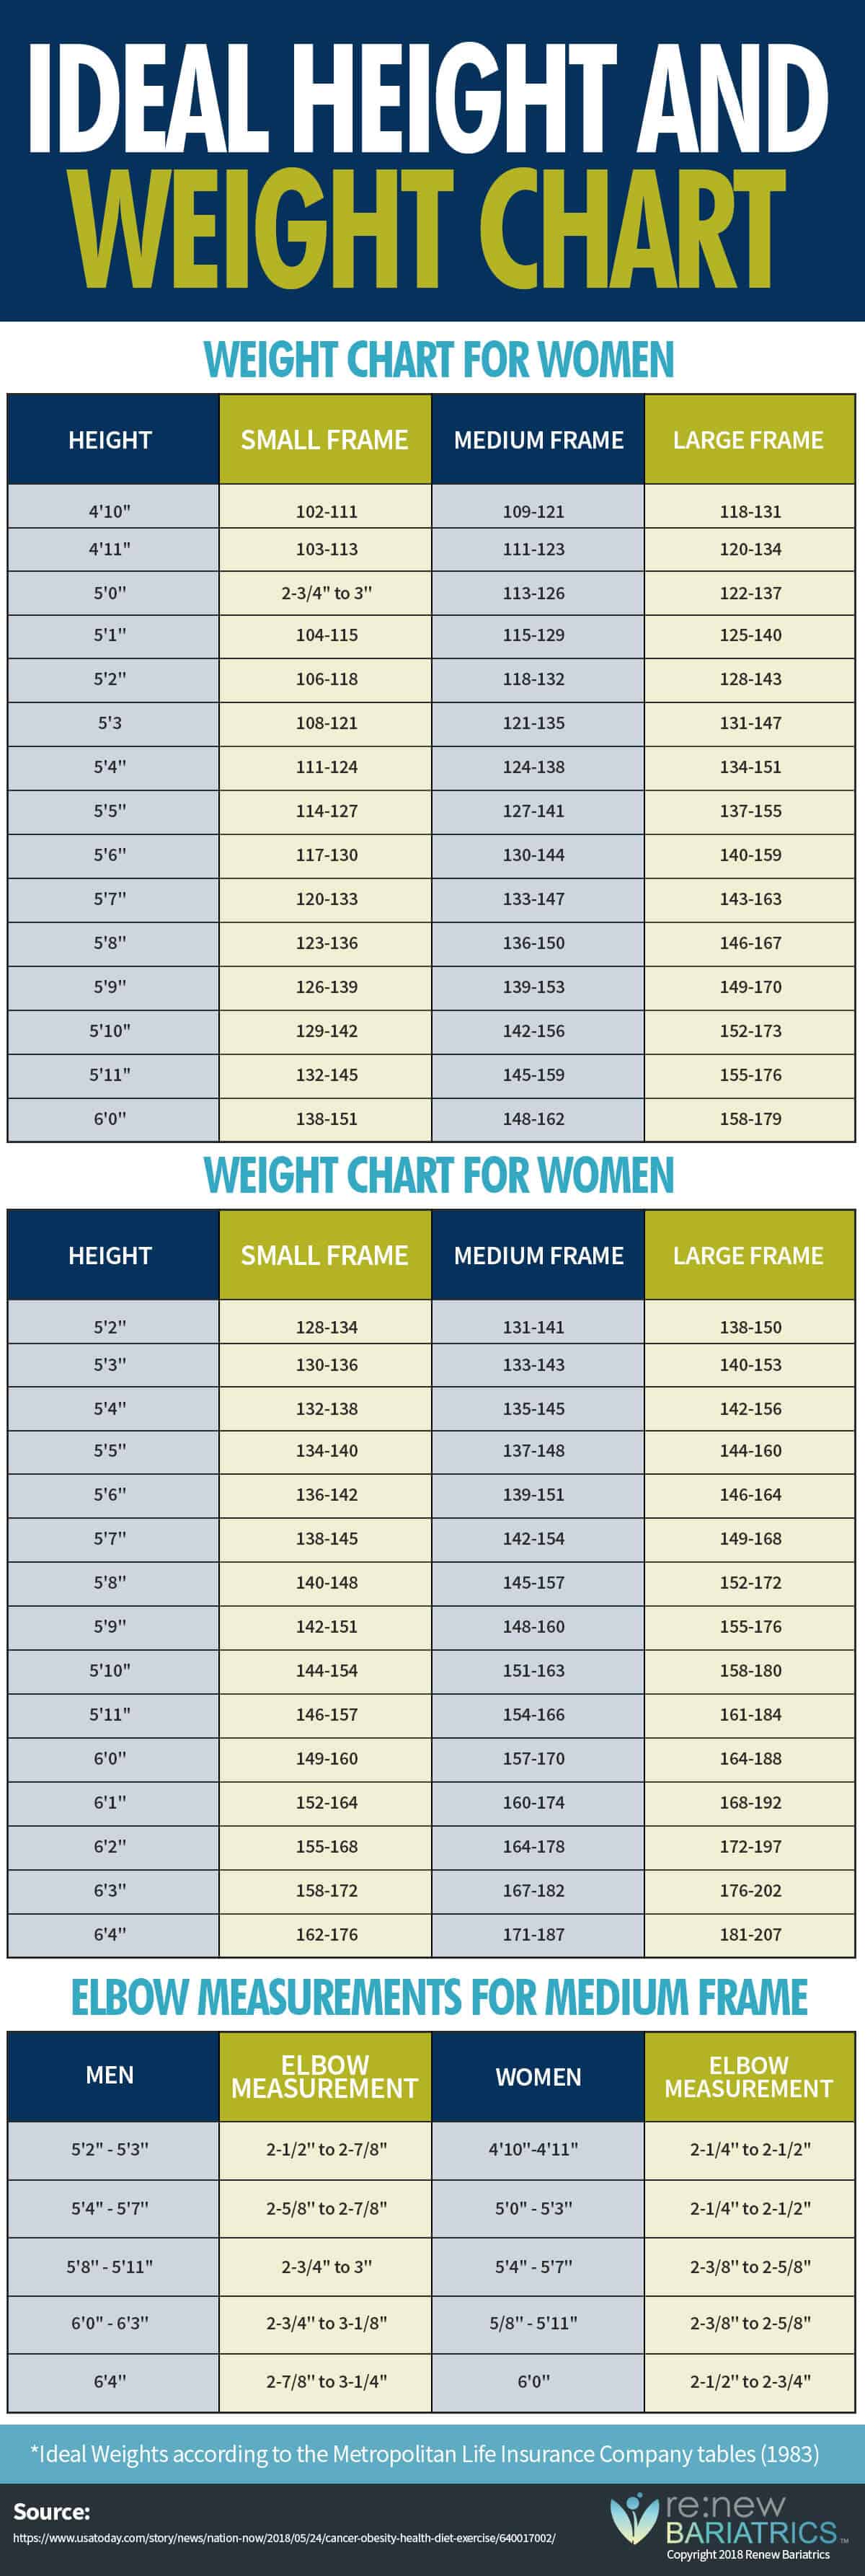 Heights And Weights For Women